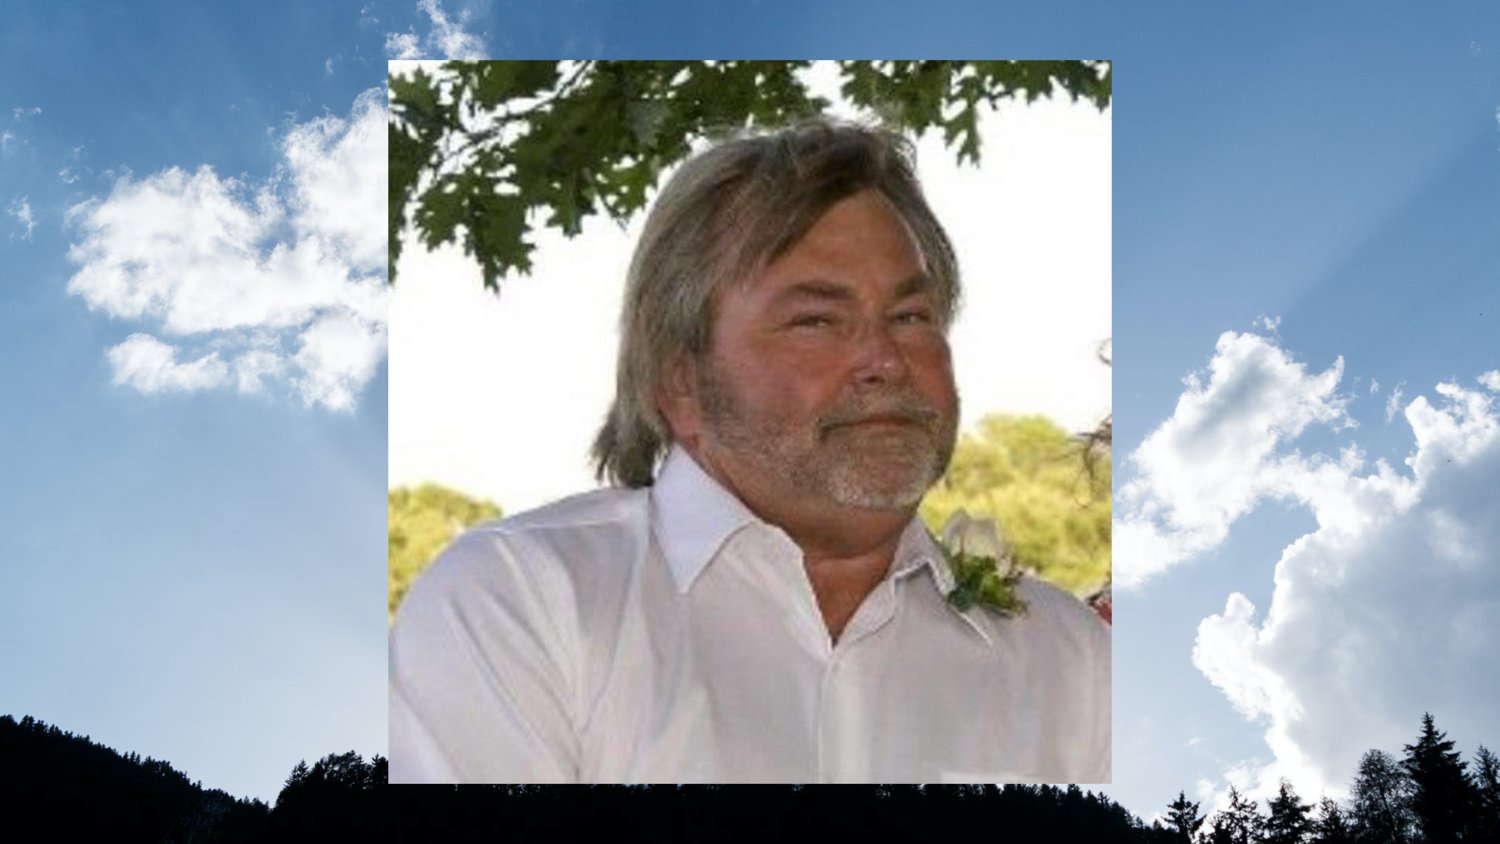 Jerry Wayne Bolden passed away May 19 at the age of 62. He leaves behind an extensive family. He lived in Katy with his wife and children since 1998, was an automotive enthusiast and was the owner-operator of J&D Environmental in Katy.